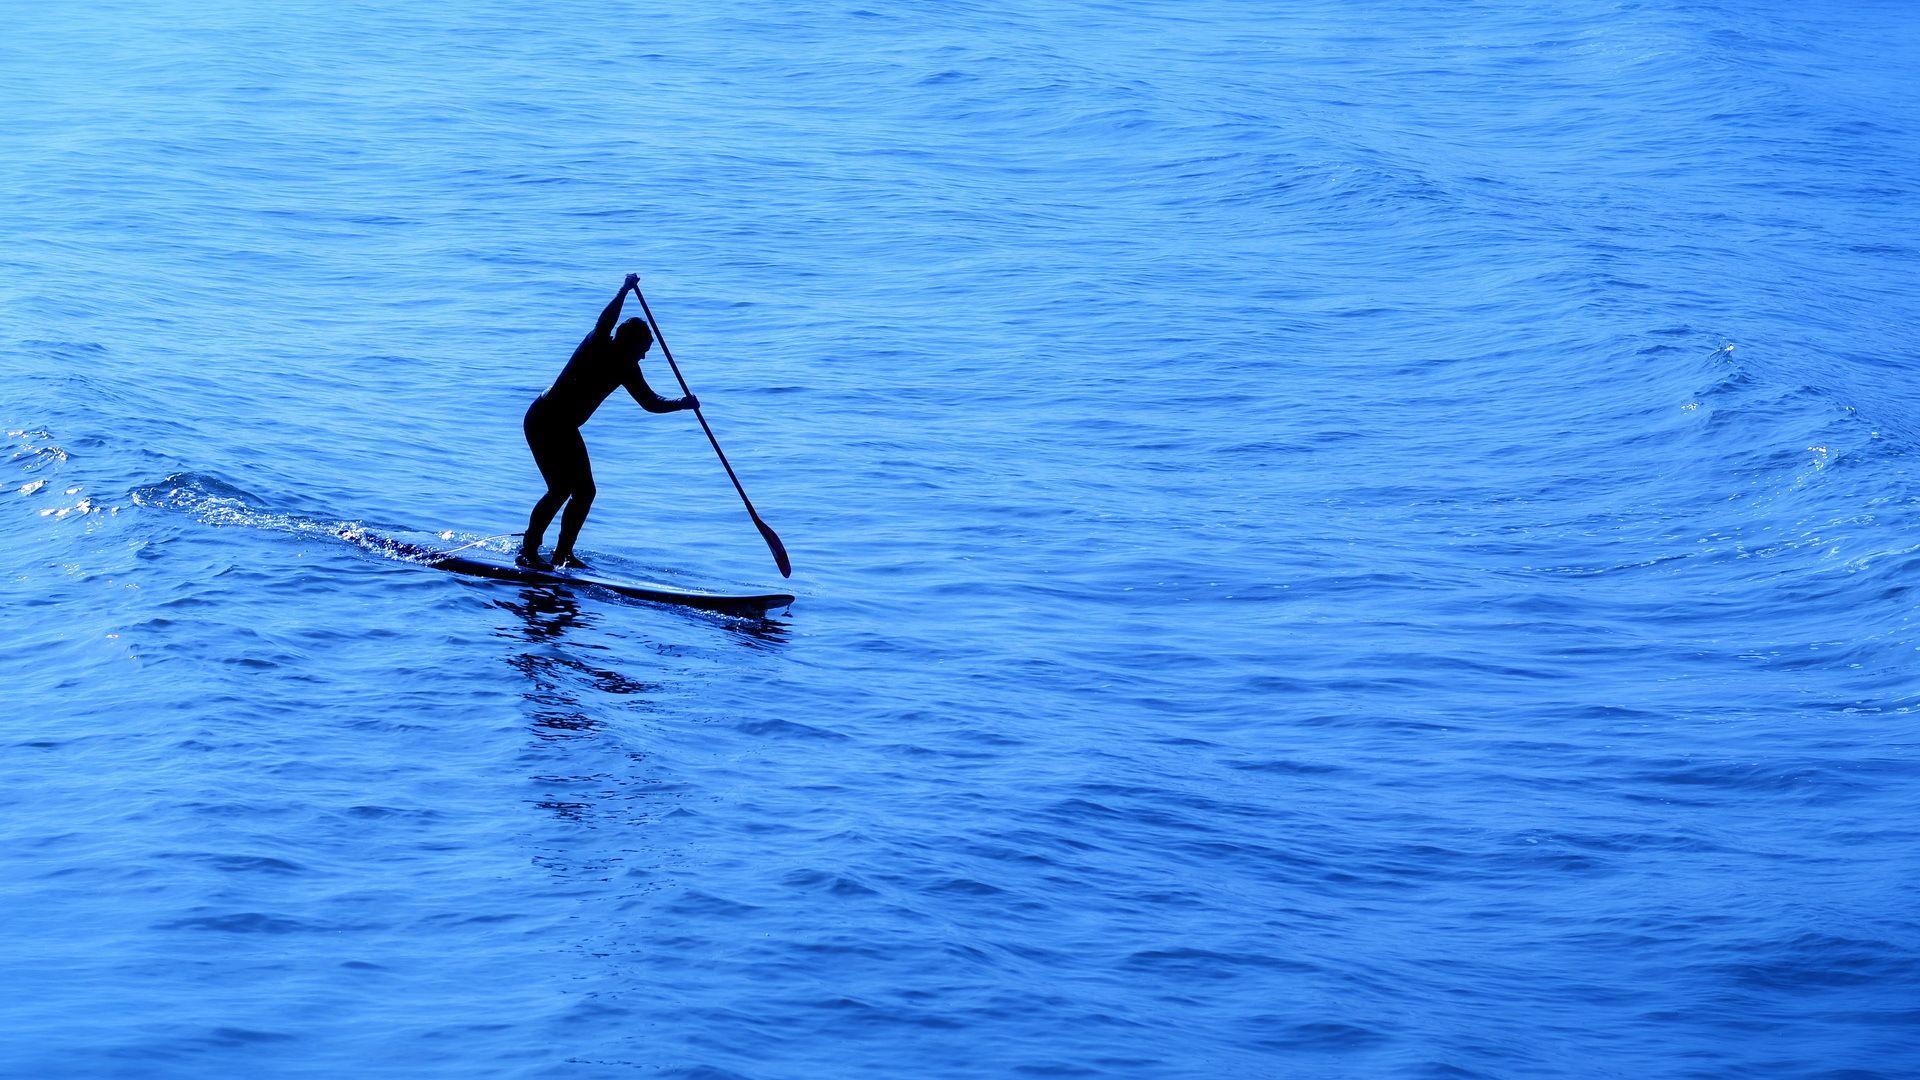 Ocean SUP Surfing full HD wallpaper Paddleboarding. Stand